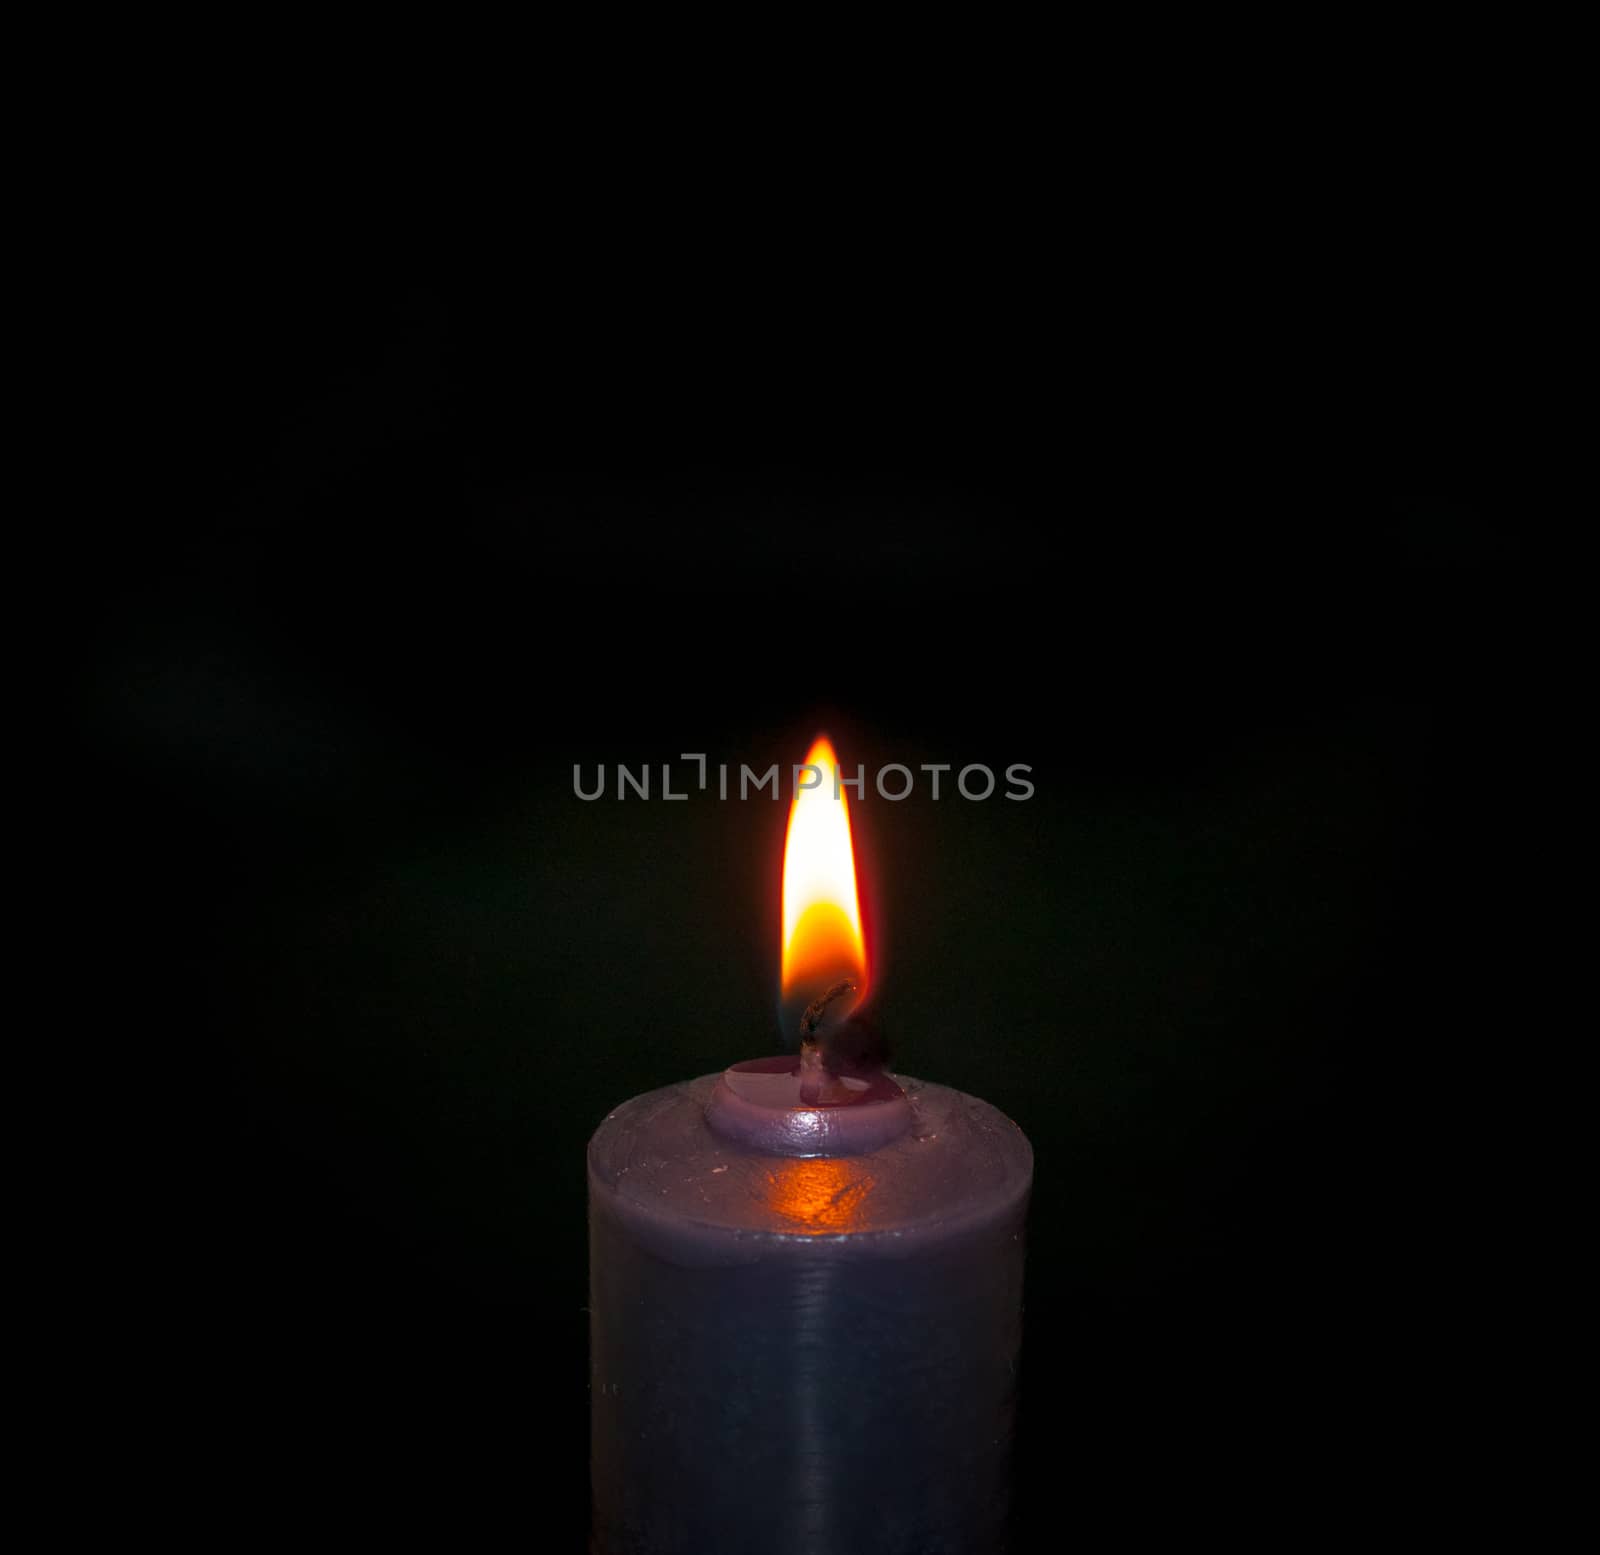 single candle, dark background, close up on the flame